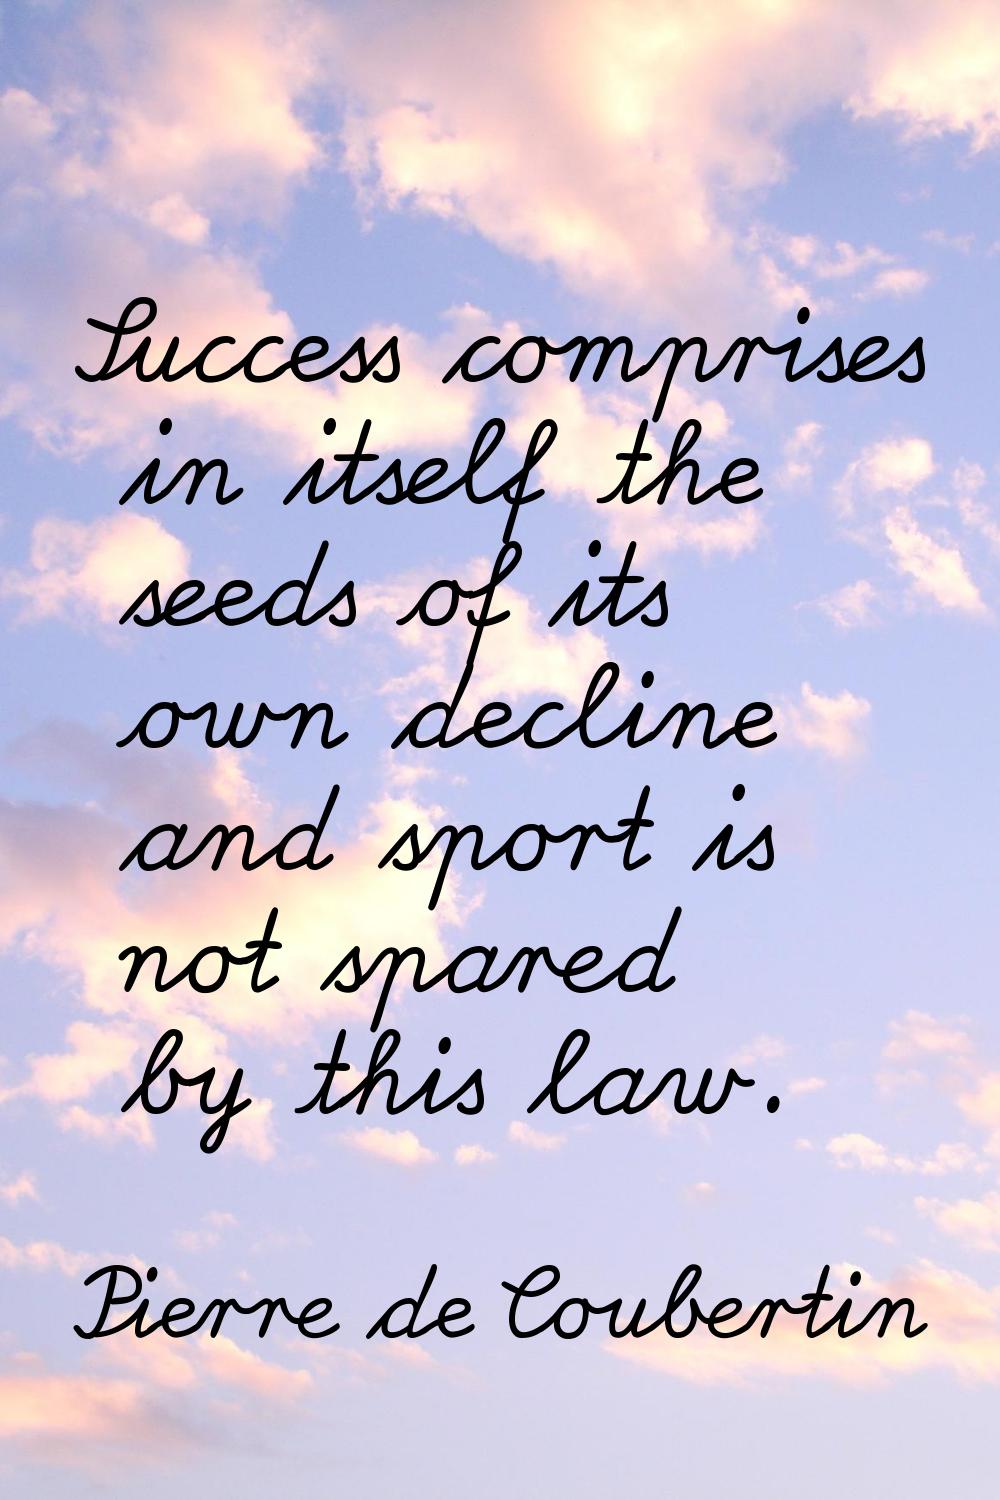 Success comprises in itself the seeds of its own decline and sport is not spared by this law.